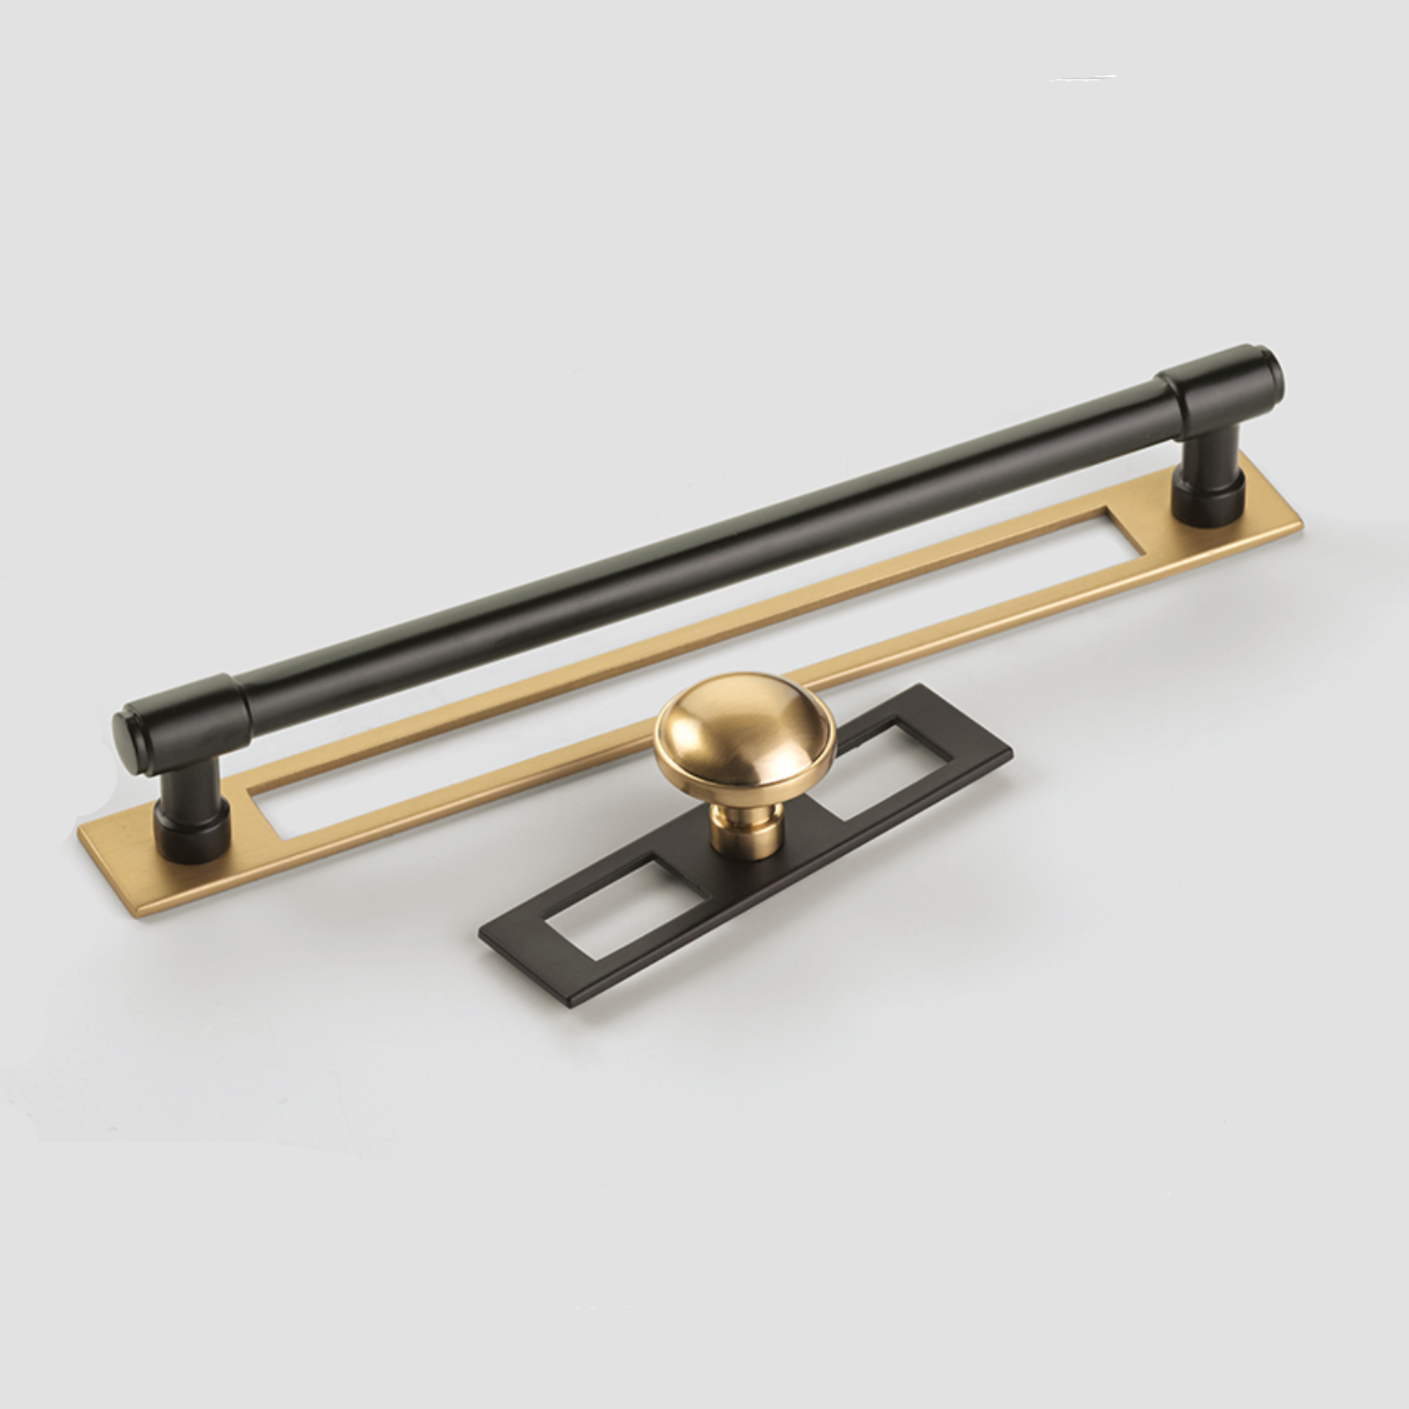 Antique Brass Grooved Cabinet Pull | Fluted Aged Brass Cabinet Pulls